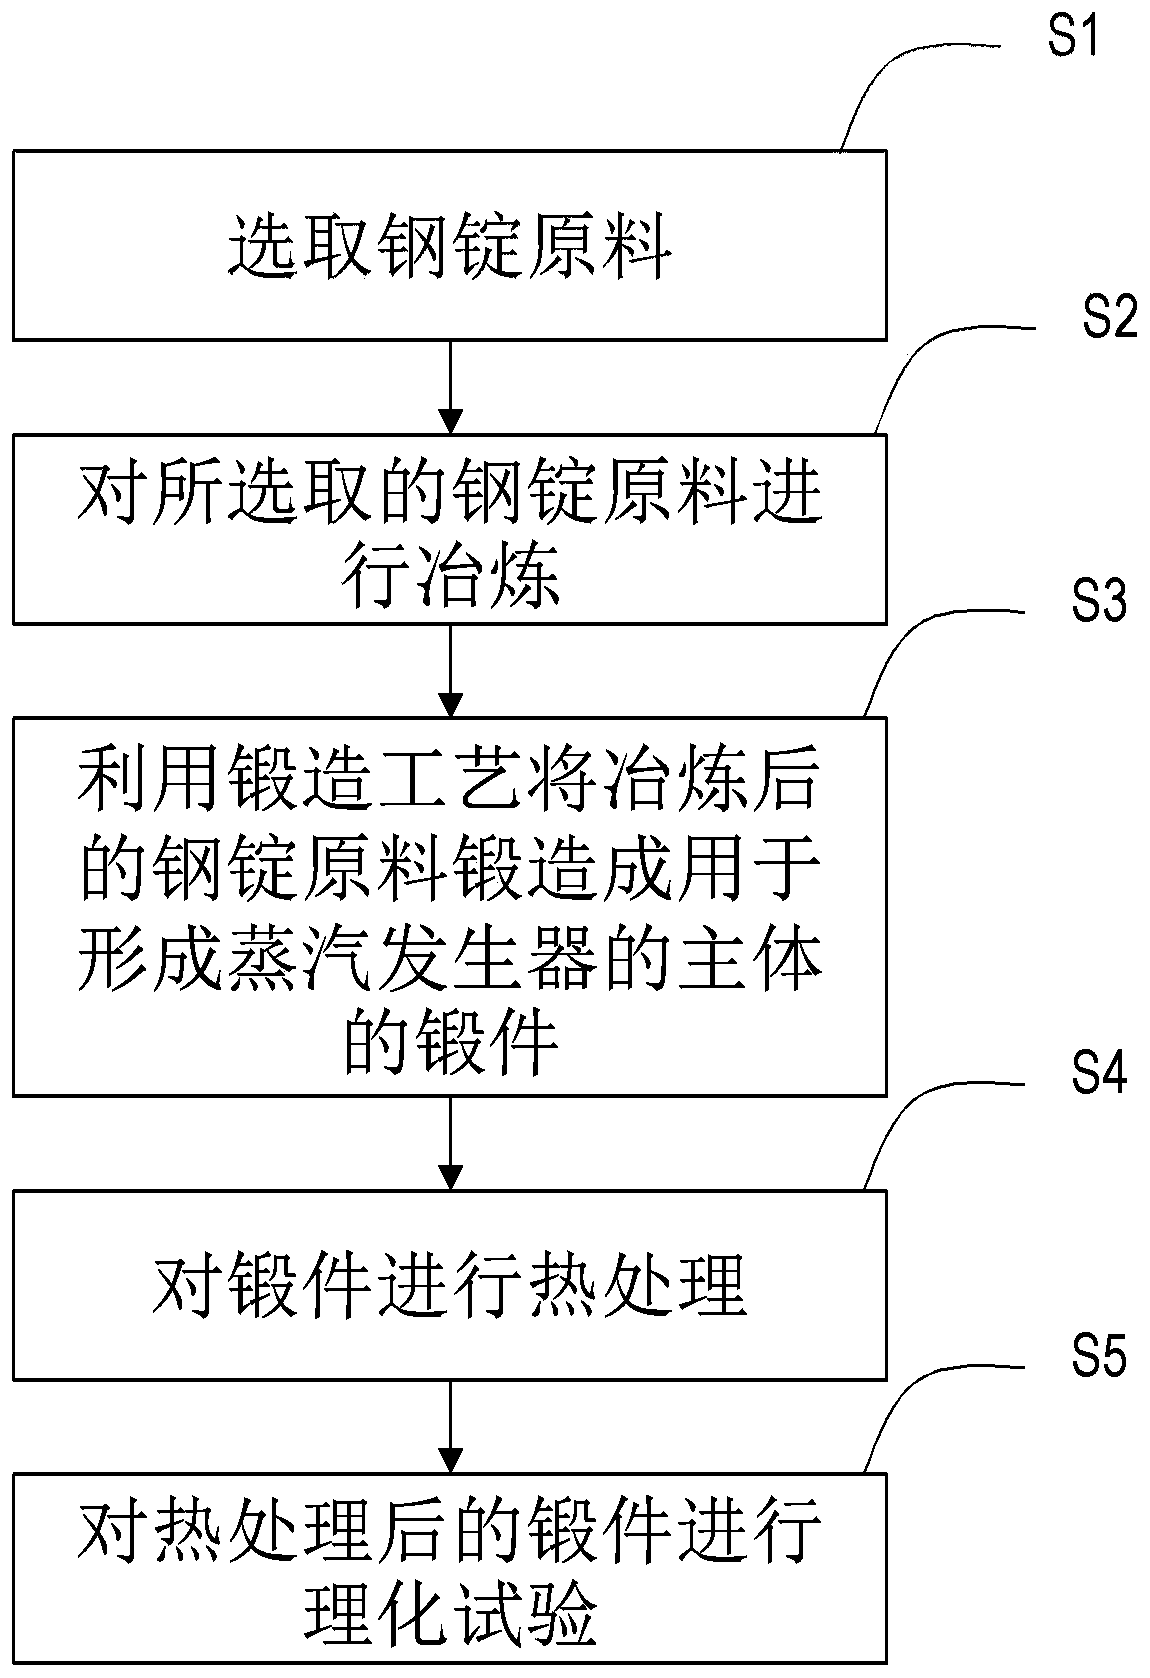 Manufacturing method of steam generator forge piece for sodium-cooled fast reactor